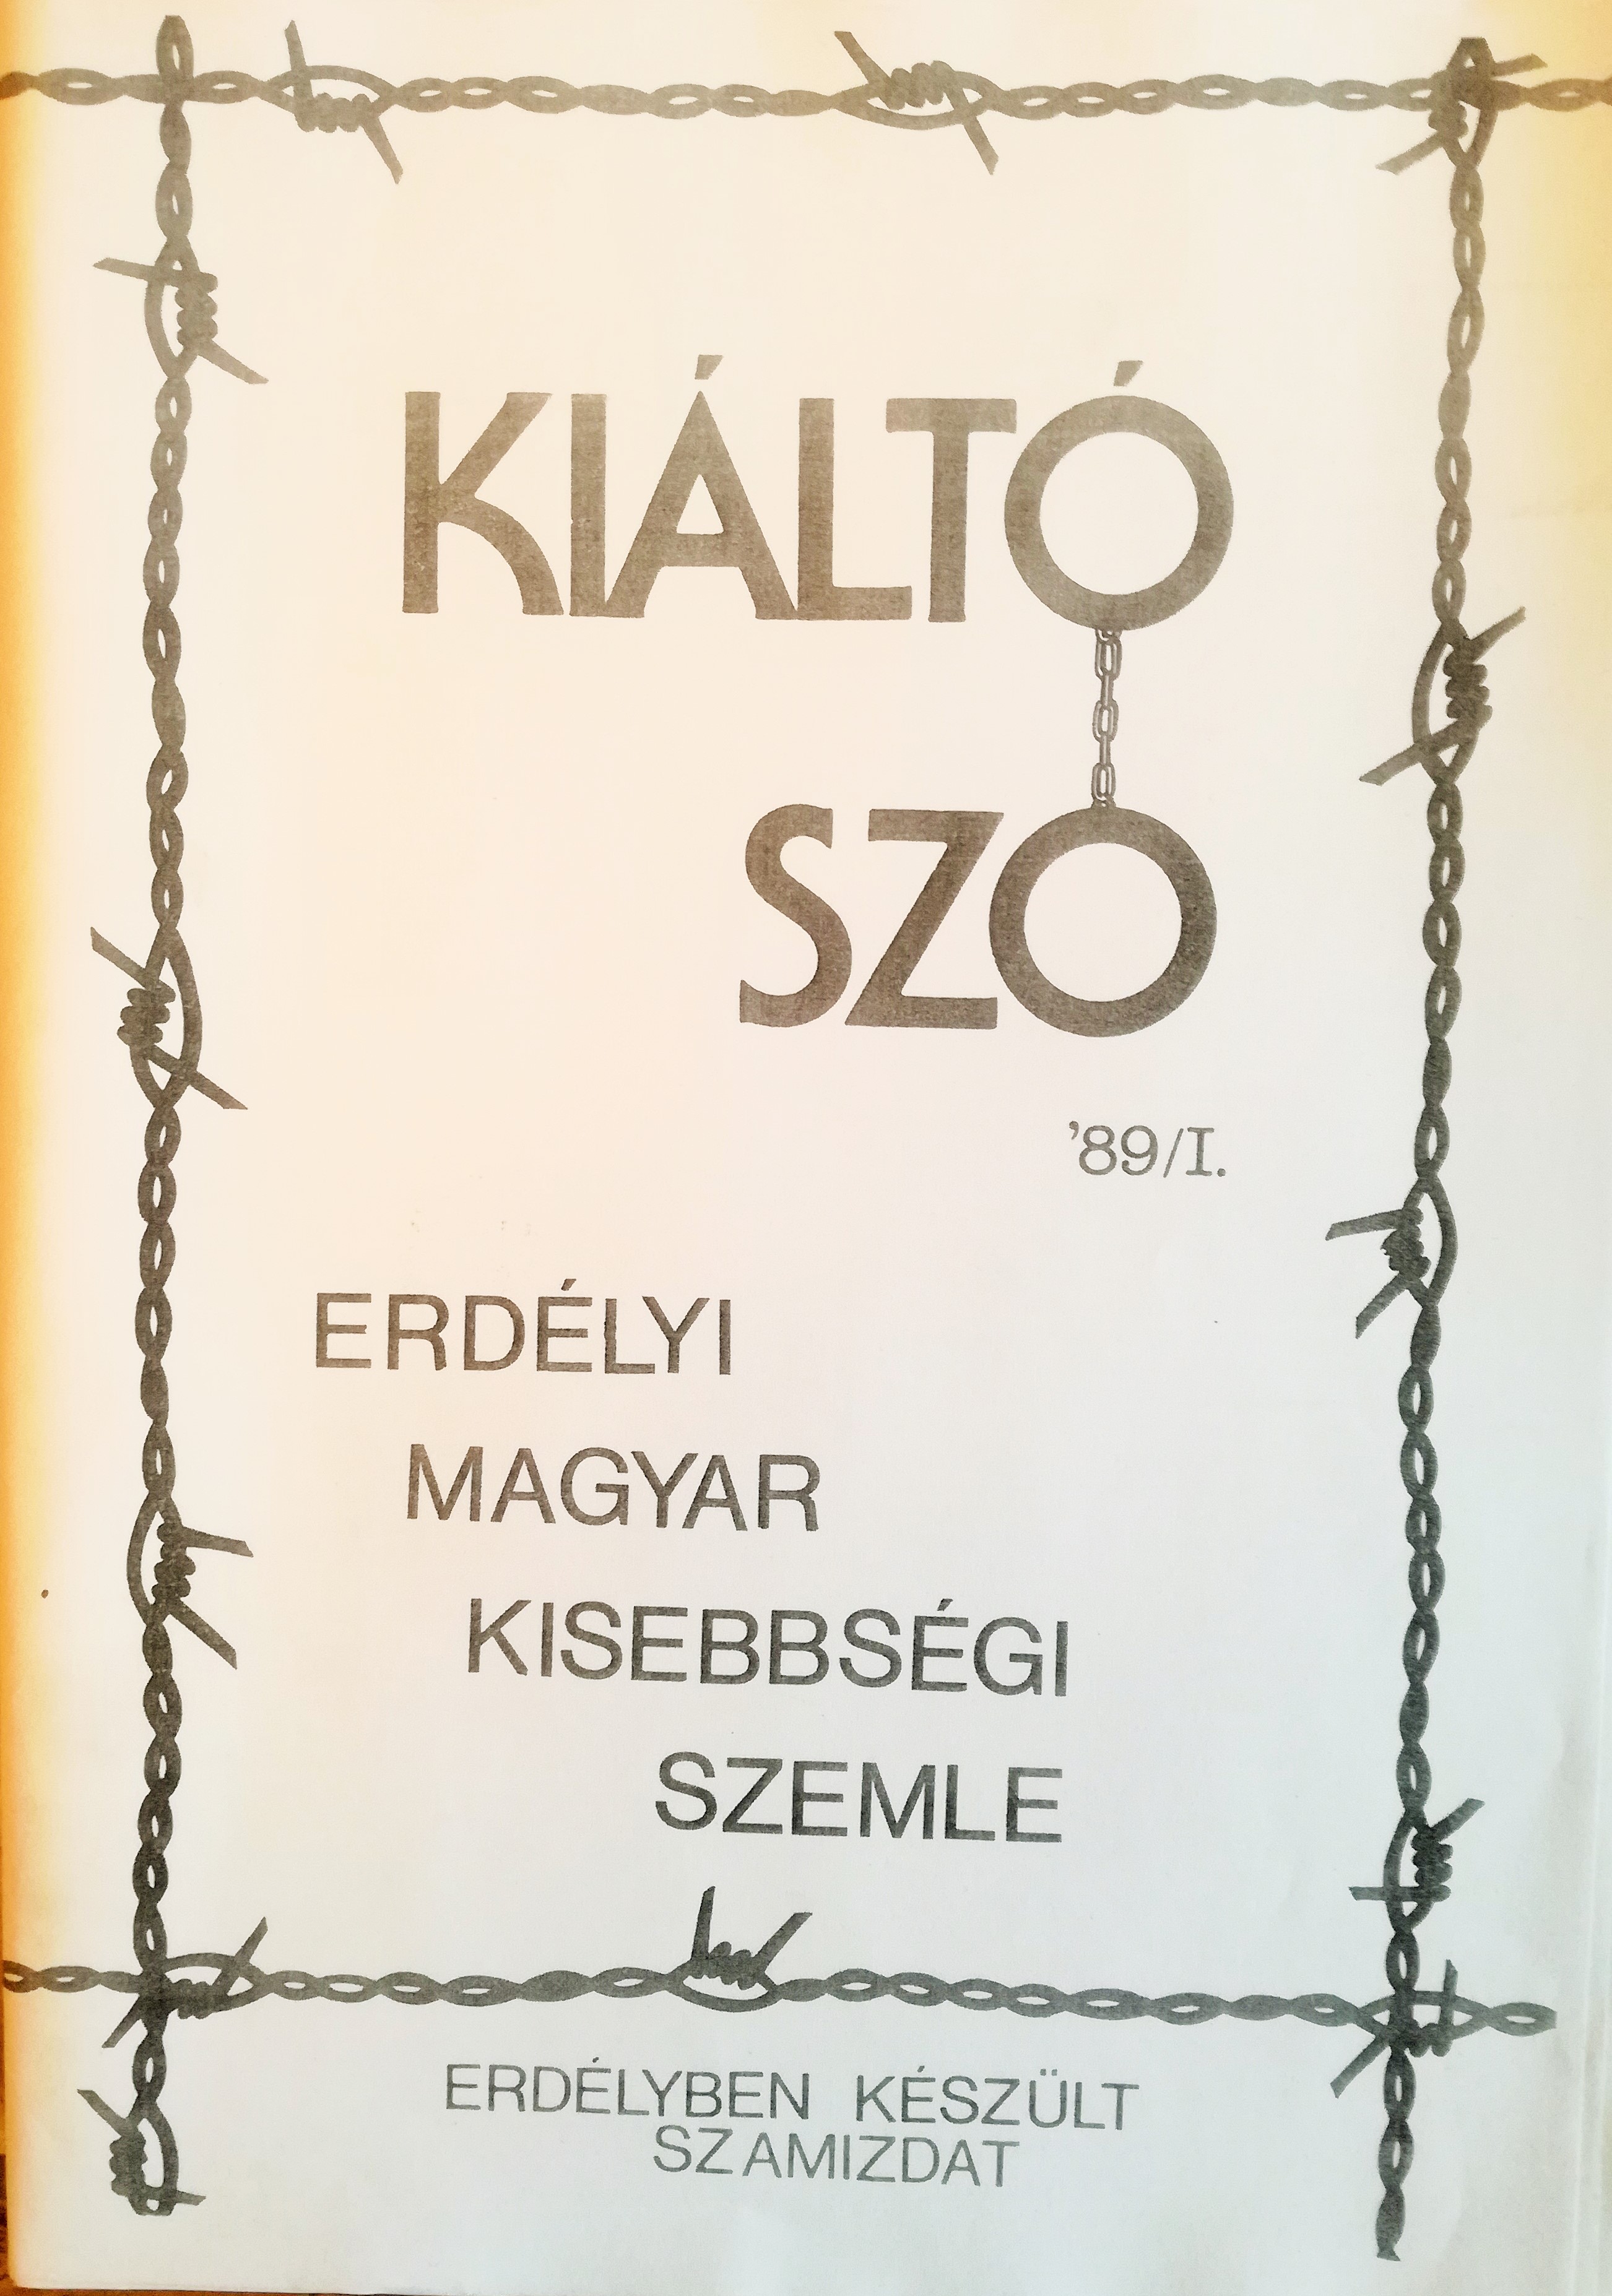 Front cover of the second issue of the Kiáltó Szó samizdat publication